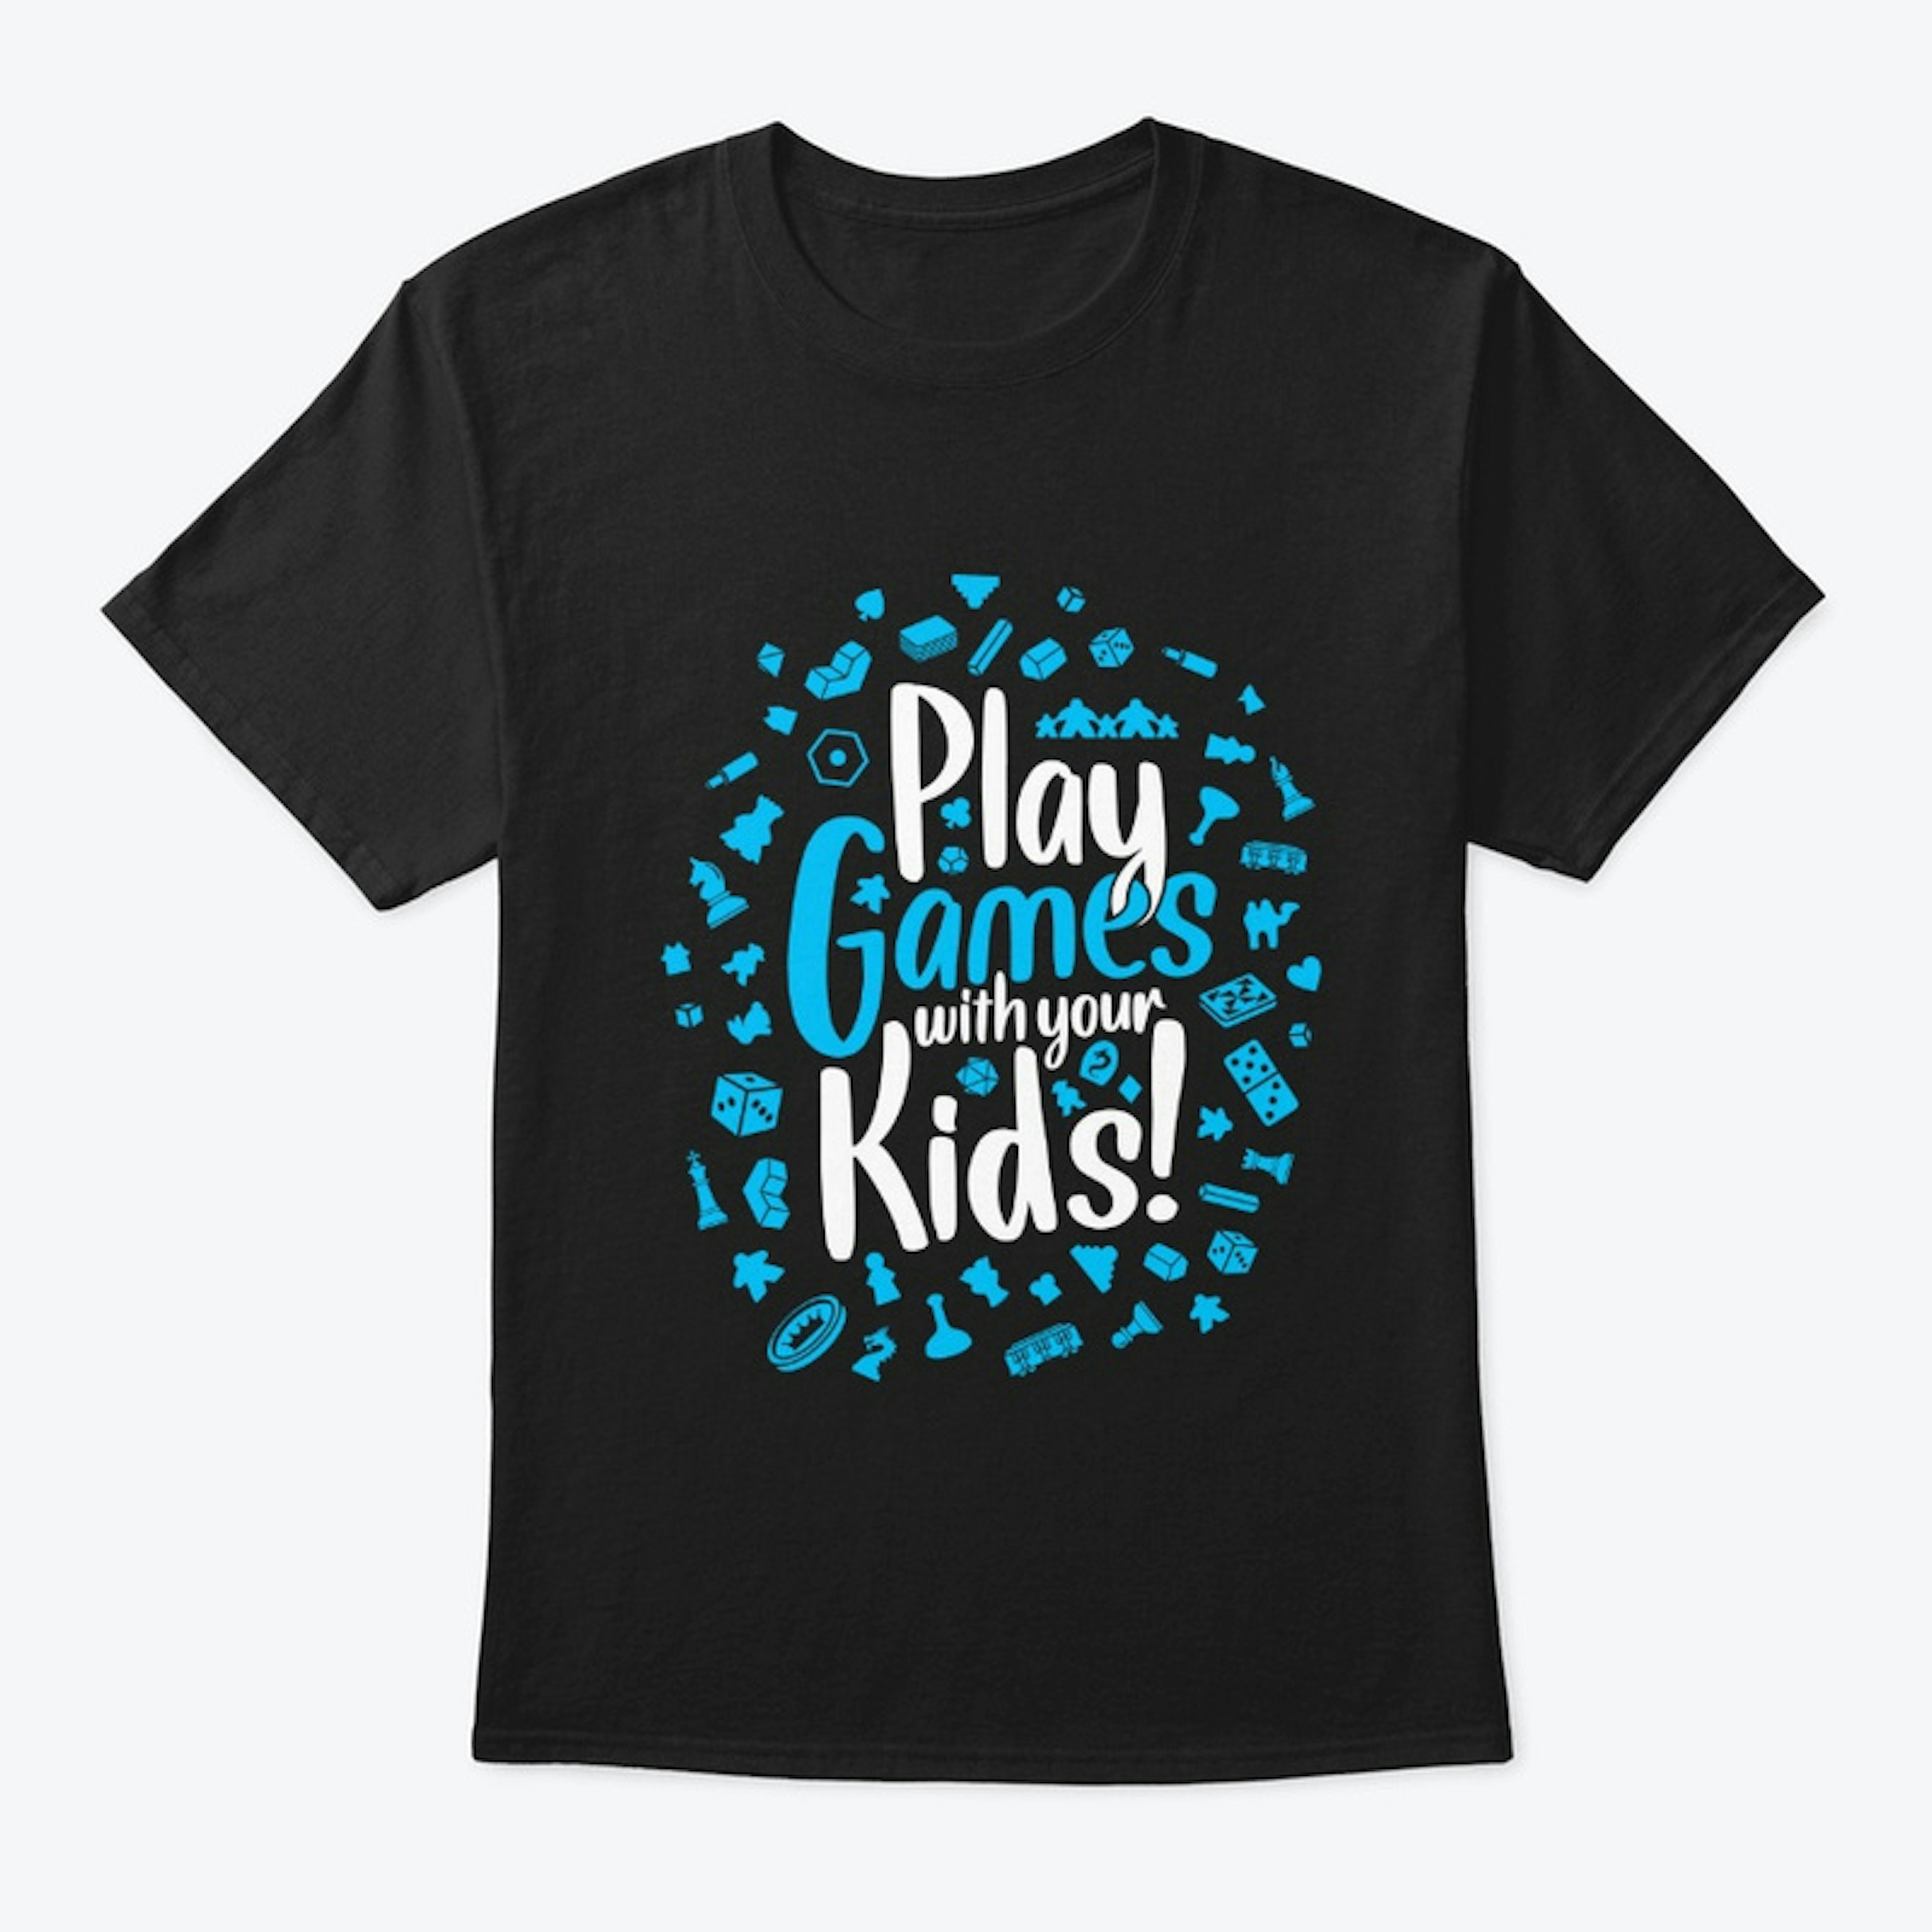 Play Games with your Kids!